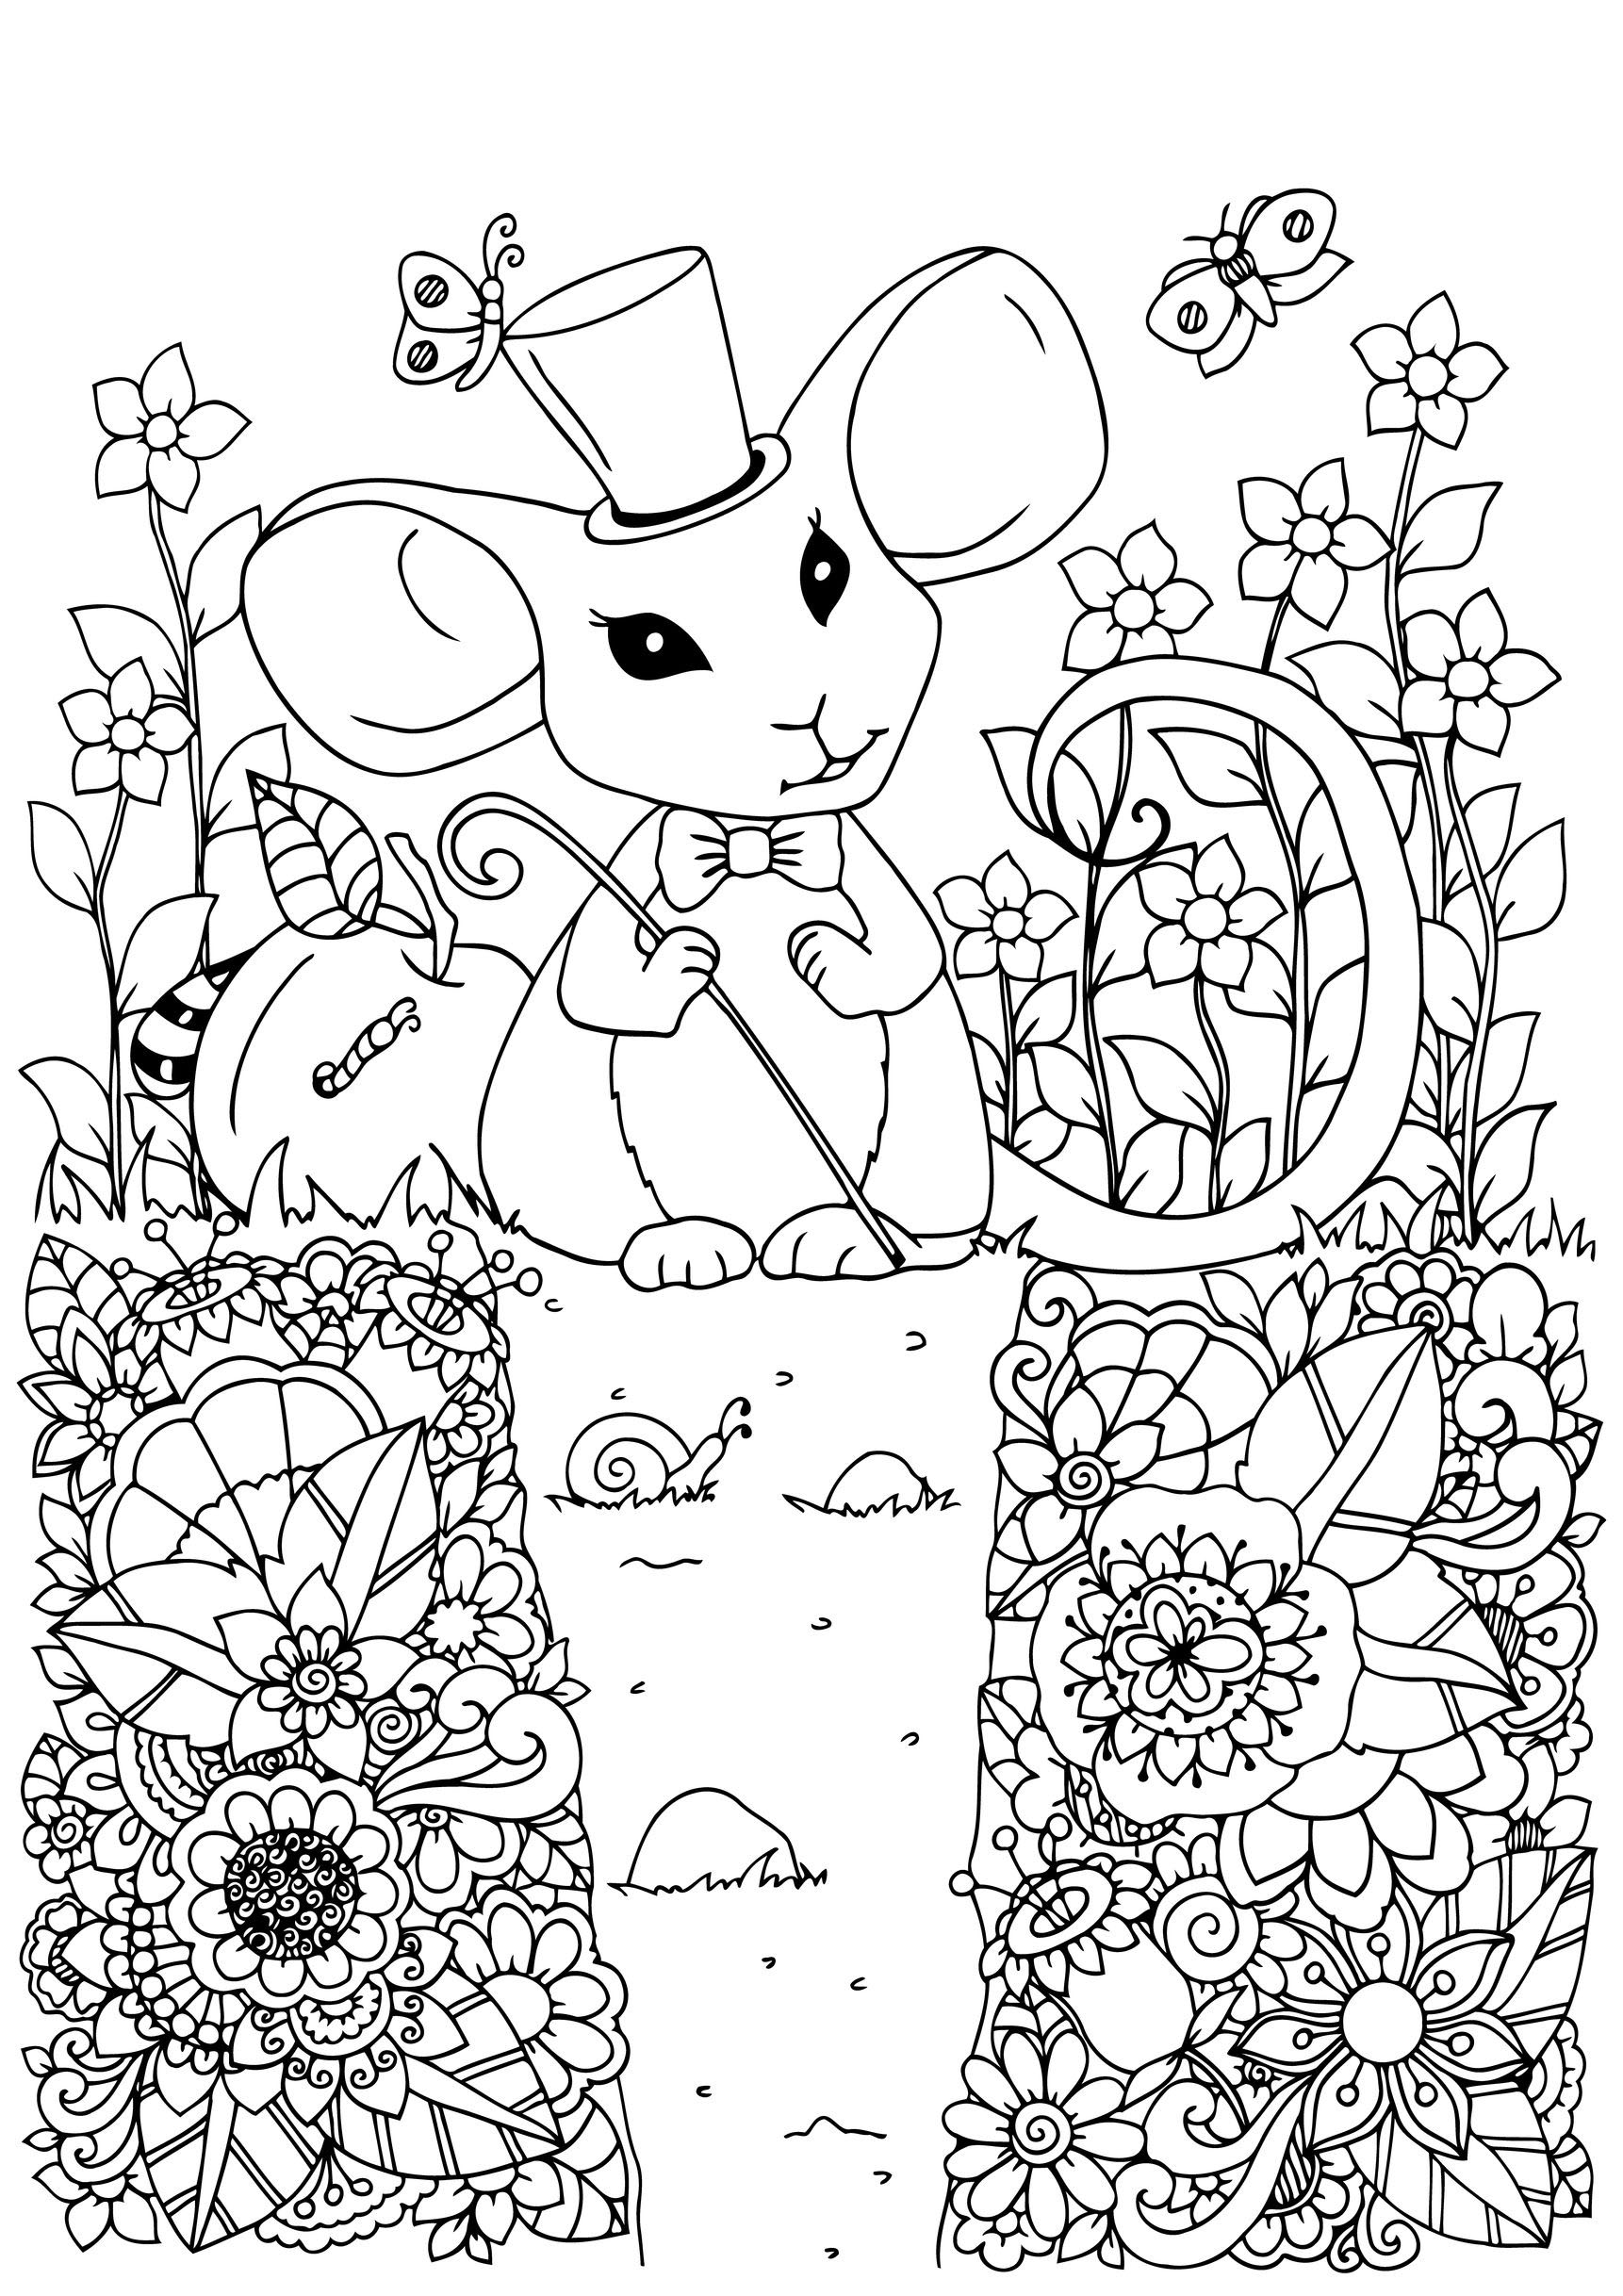 Cute mouse with her magician hat in a garden full of beautiful flowers, Source : 123rf   Artist : Tanvetka